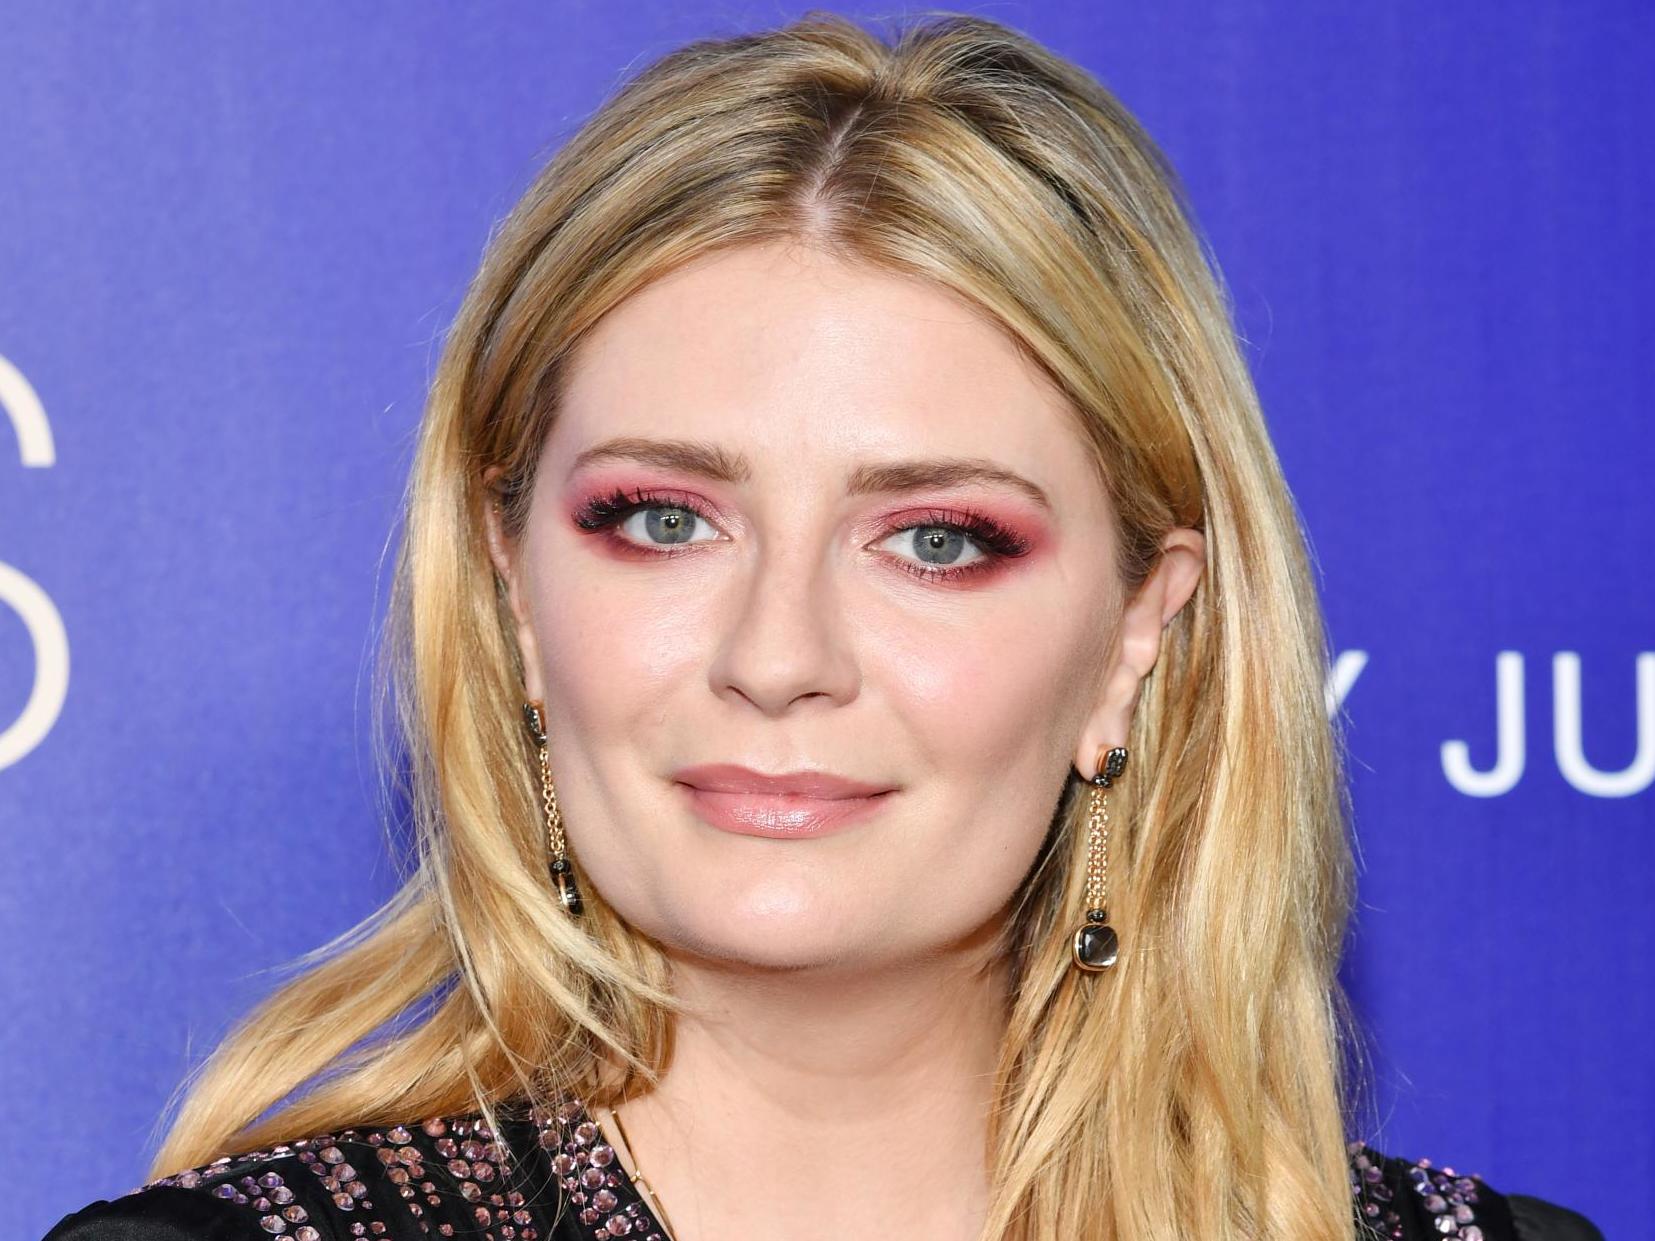 Mischa Barton attends the premiere of The Hills reboot in 2019